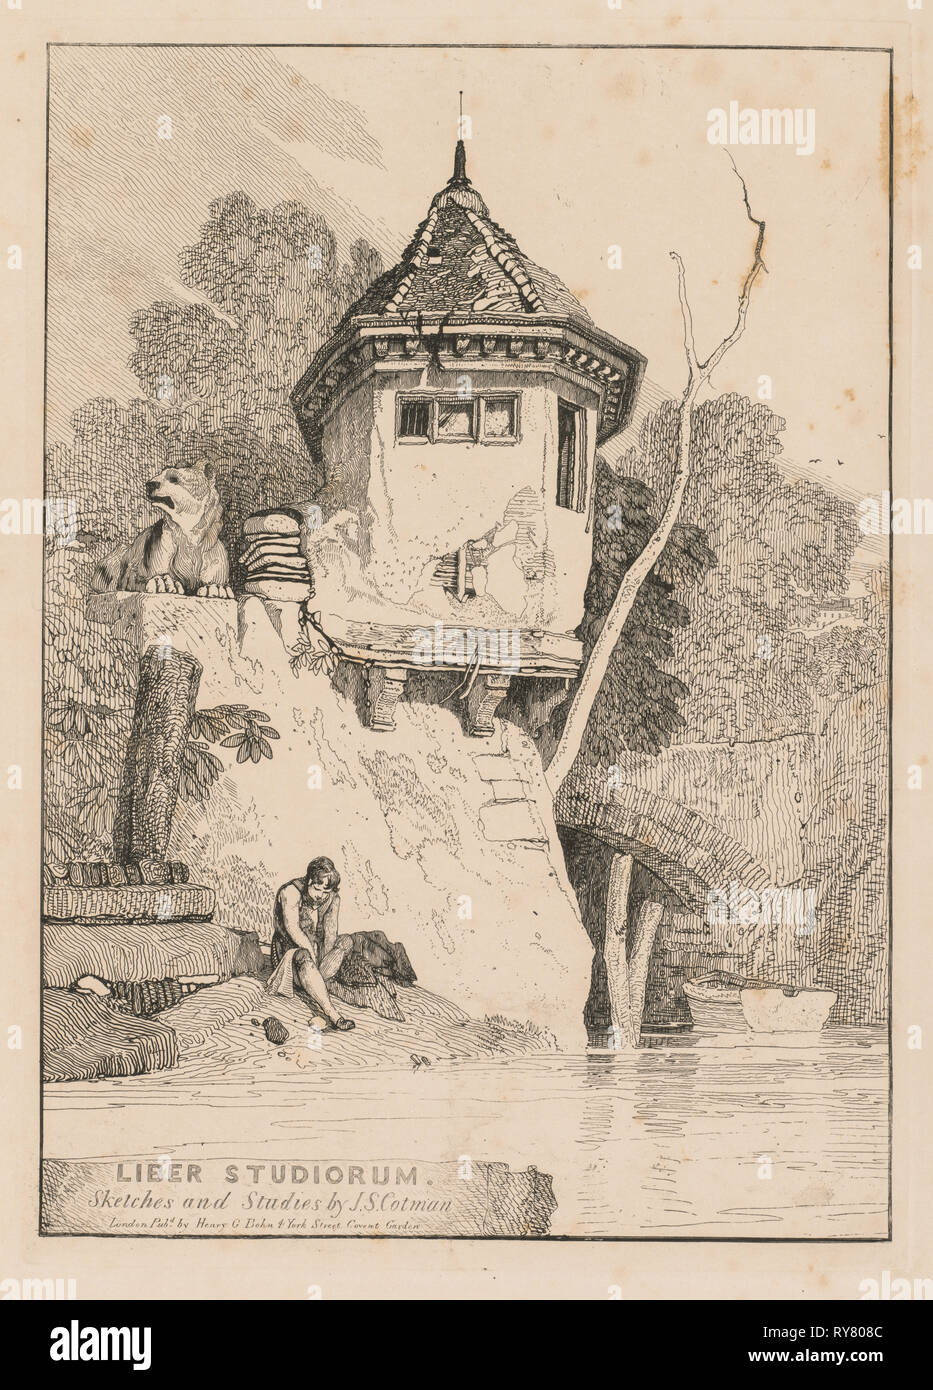 Liber Studiorum; Frontispiece, View of a Garden House on the Banks of the River Yare, 1838. John Sell Cotman (British, 1782-1842). Softground etching, from a bound volume containing 48 plates; sheet: 49.7 x 31.9 cm (19 9/16 x 12 9/16 in.); platemark: 30.4 x 21.5 cm (11 15/16 x 8 7/16 in.); to borderline: 28.9 x 20.5 cm (11 3/8 x 8 1/16 in Stock Photo